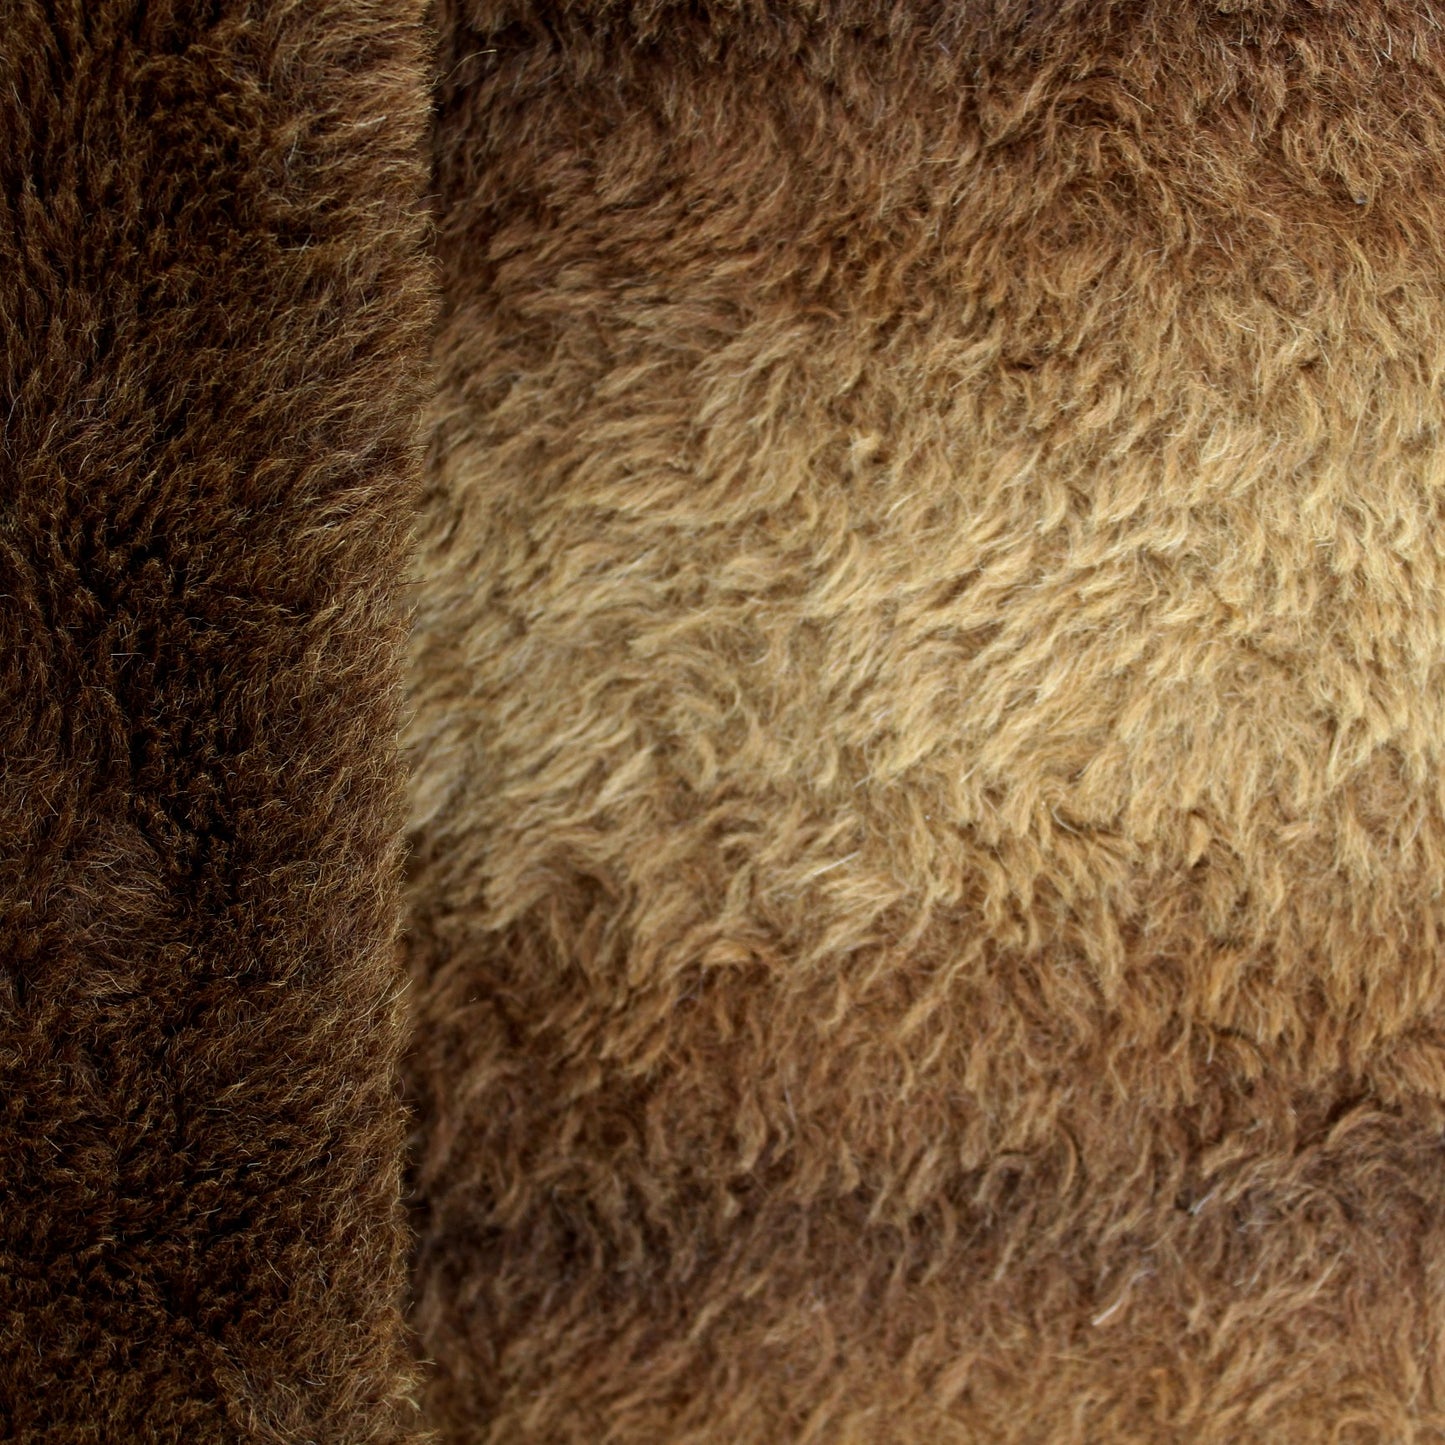 Antique Alpaca Wool Blanket Abercrombie Fitch Handsome Shades Brown closeup of fur